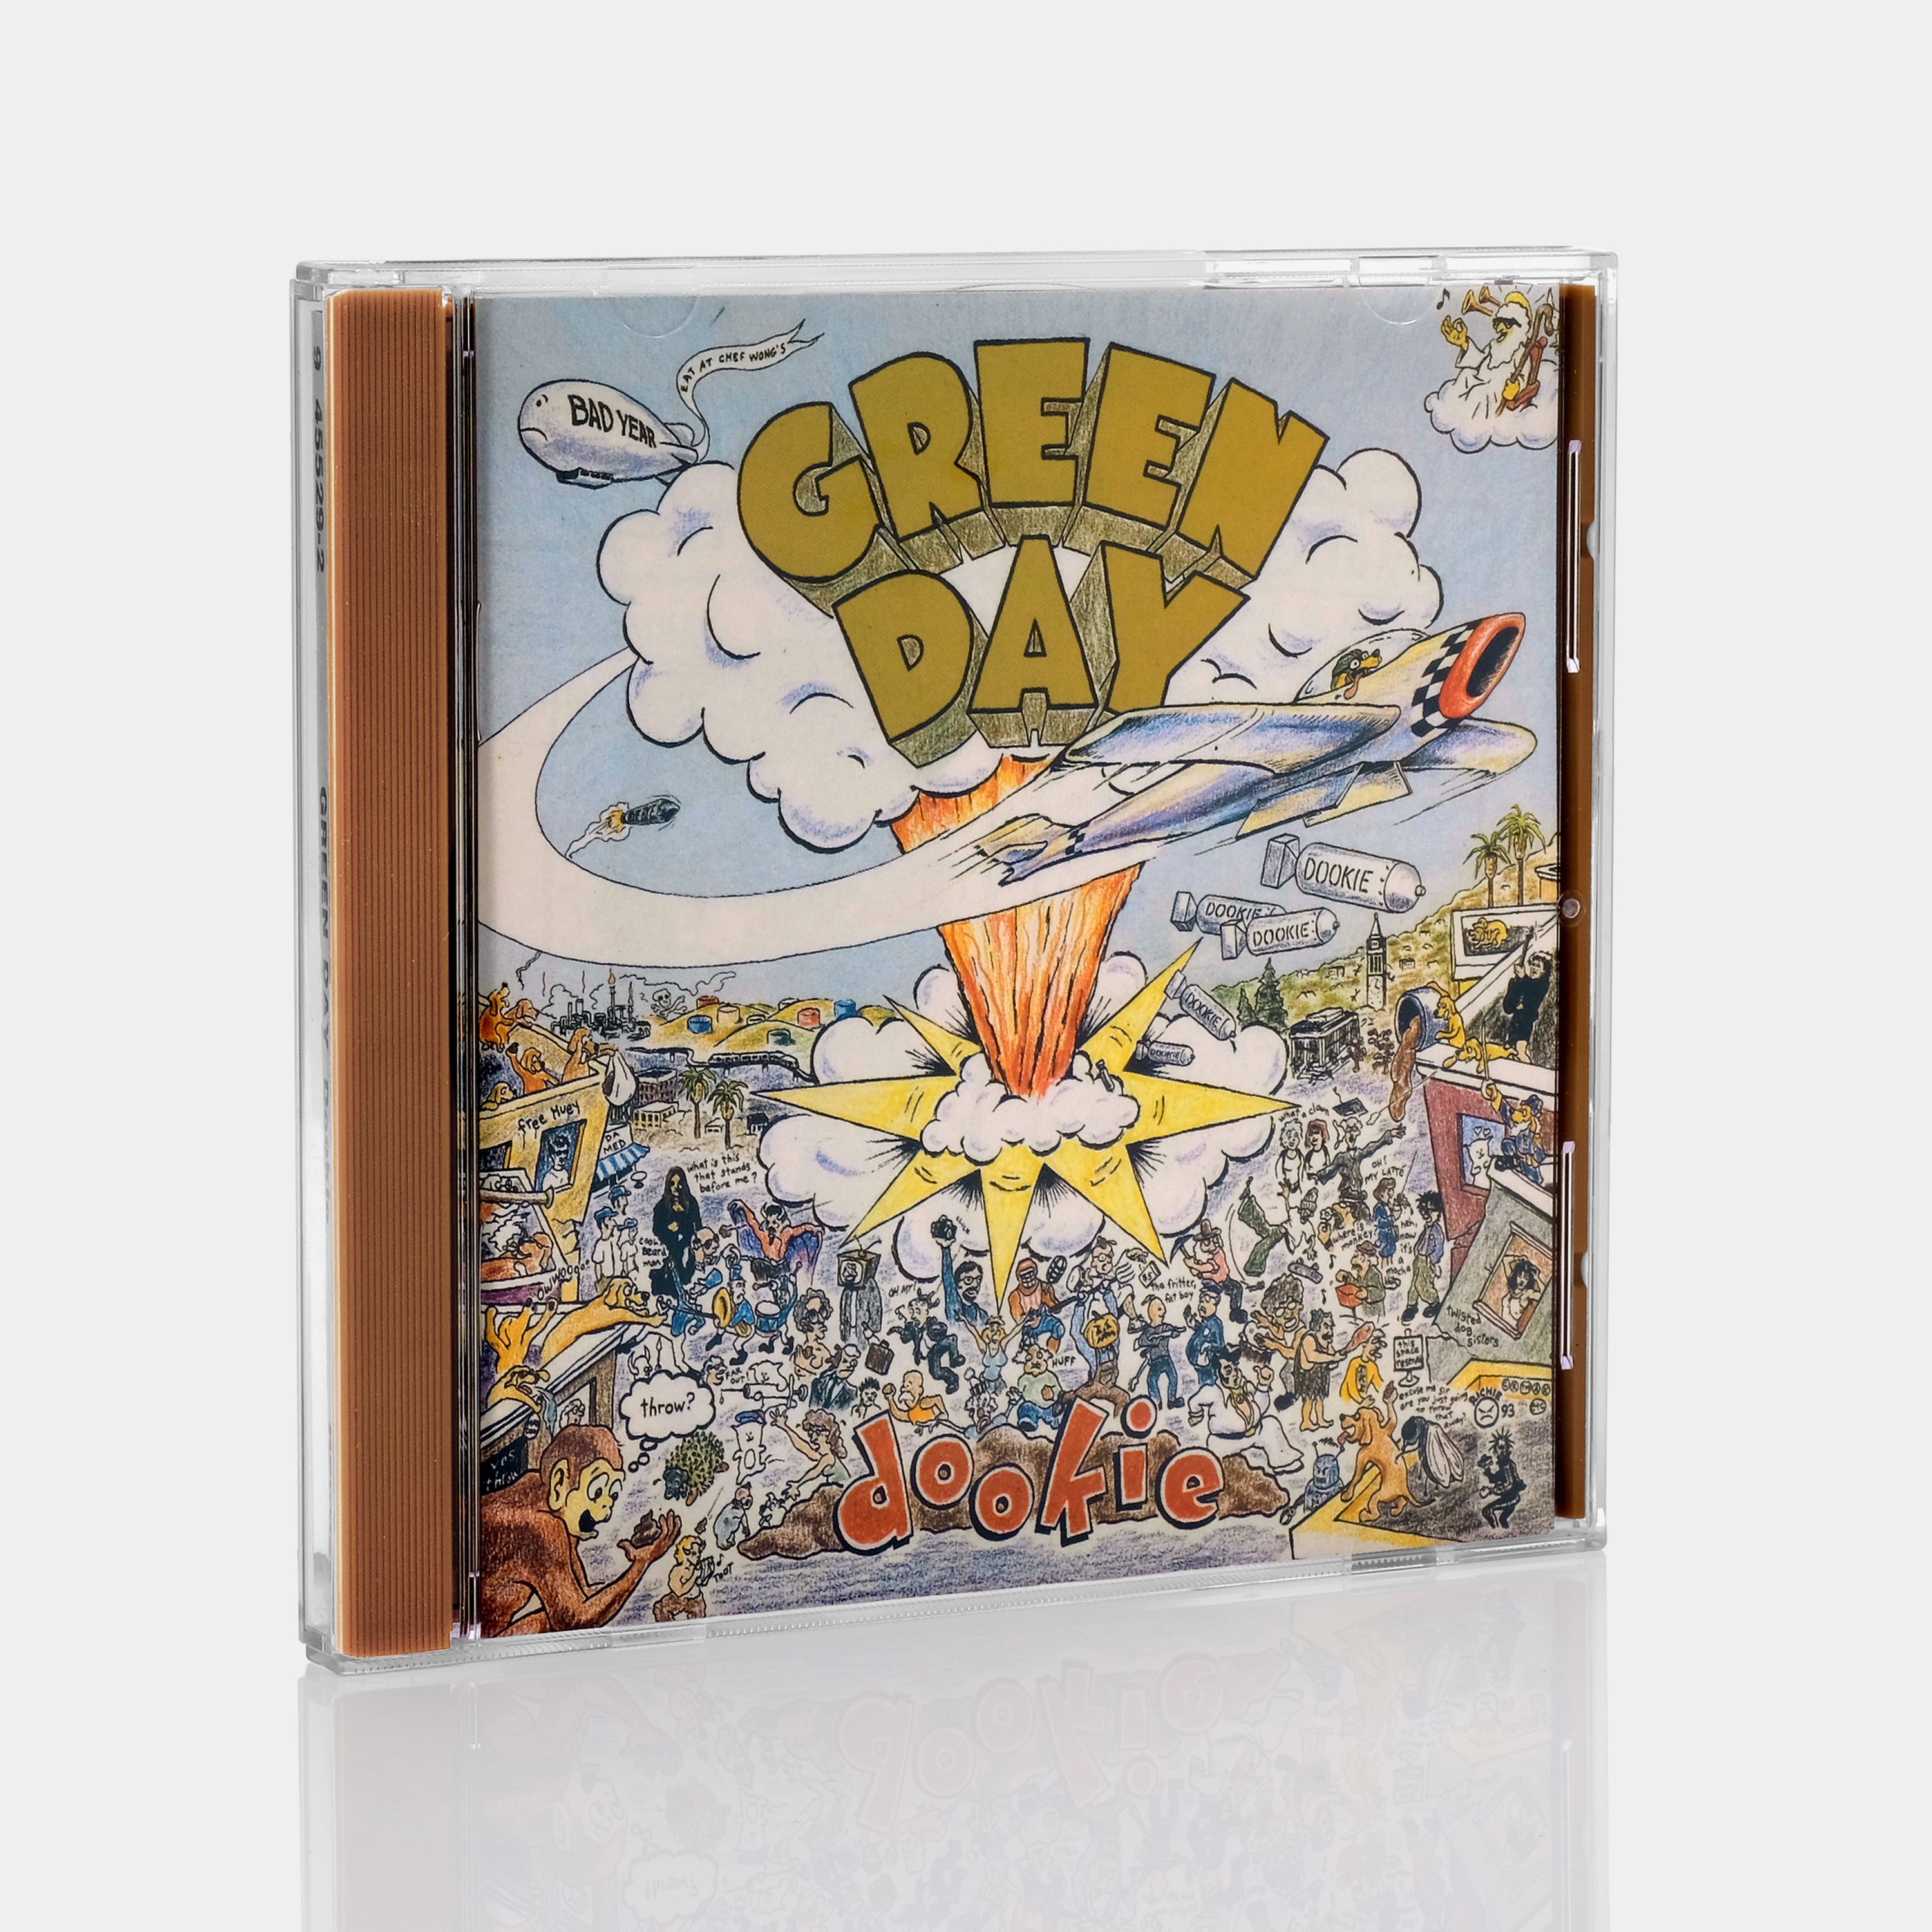 Green Day - Dookie CD